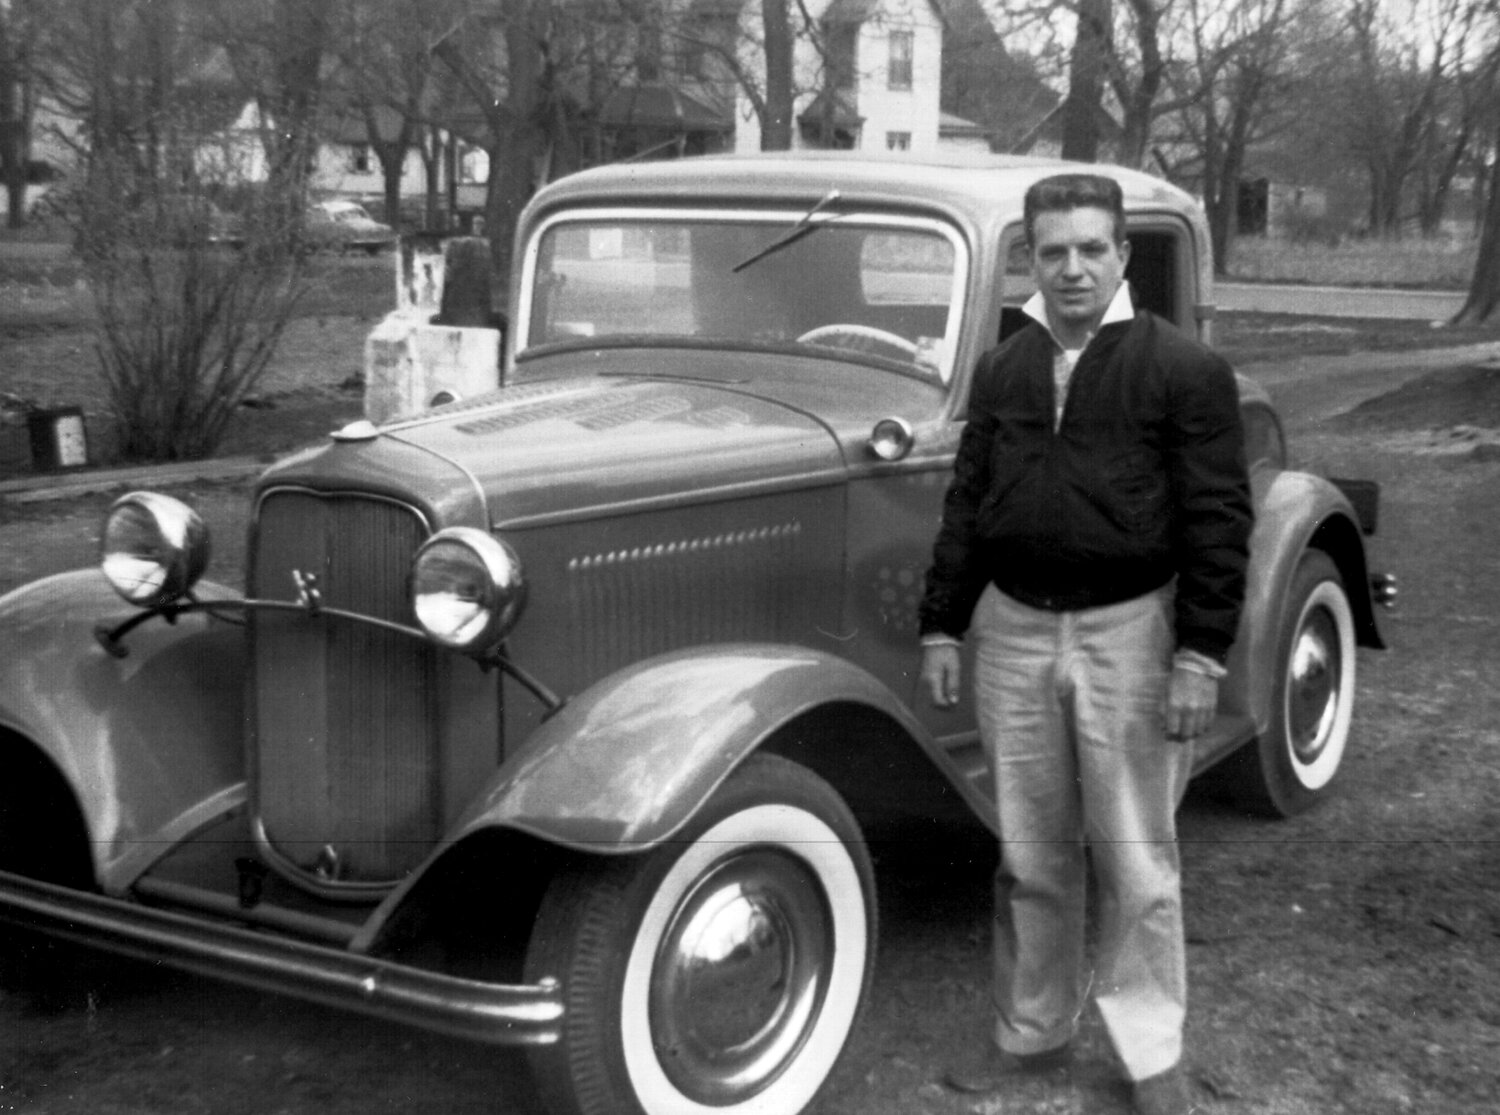 Dicks Hines poses next to his 1932 Ford in Chalfont. The photograph is part of John Abbott's "A Nostalgic Oral History of Chalfont."